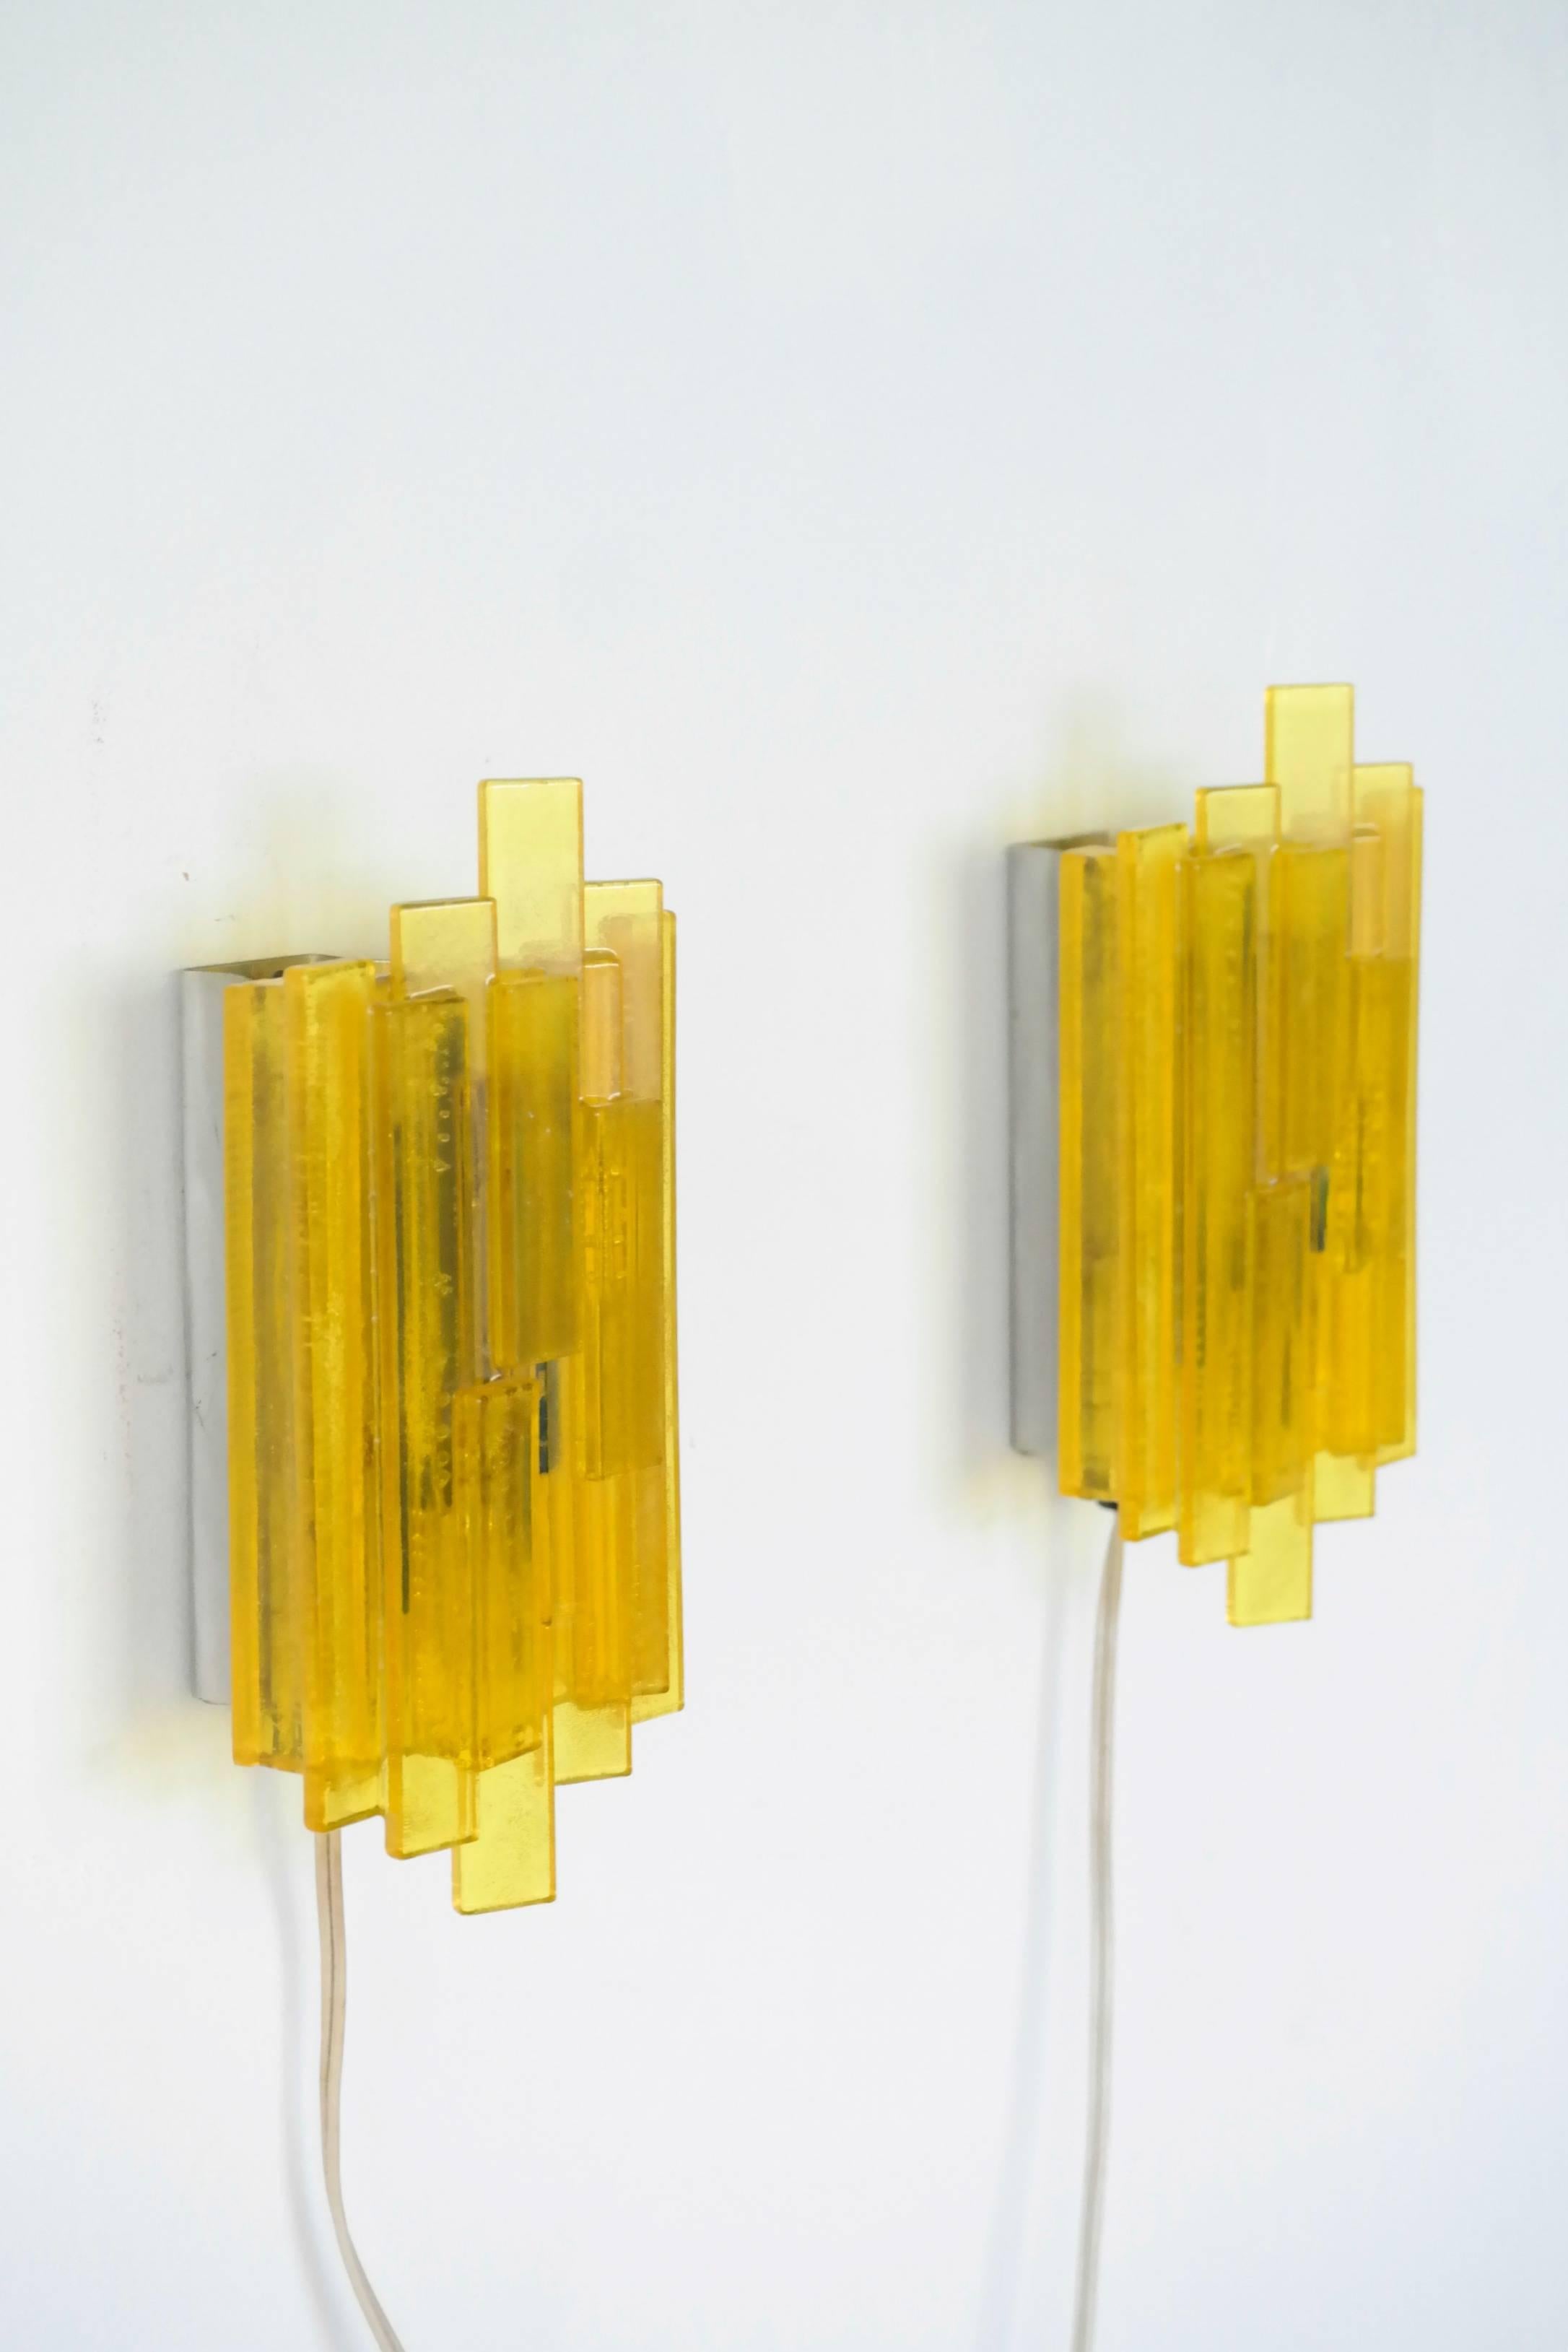 Mid-20th Century Pair of Danish Midcentury Space Age Yellow Acrylic Wall Sconces by Claus Bolby